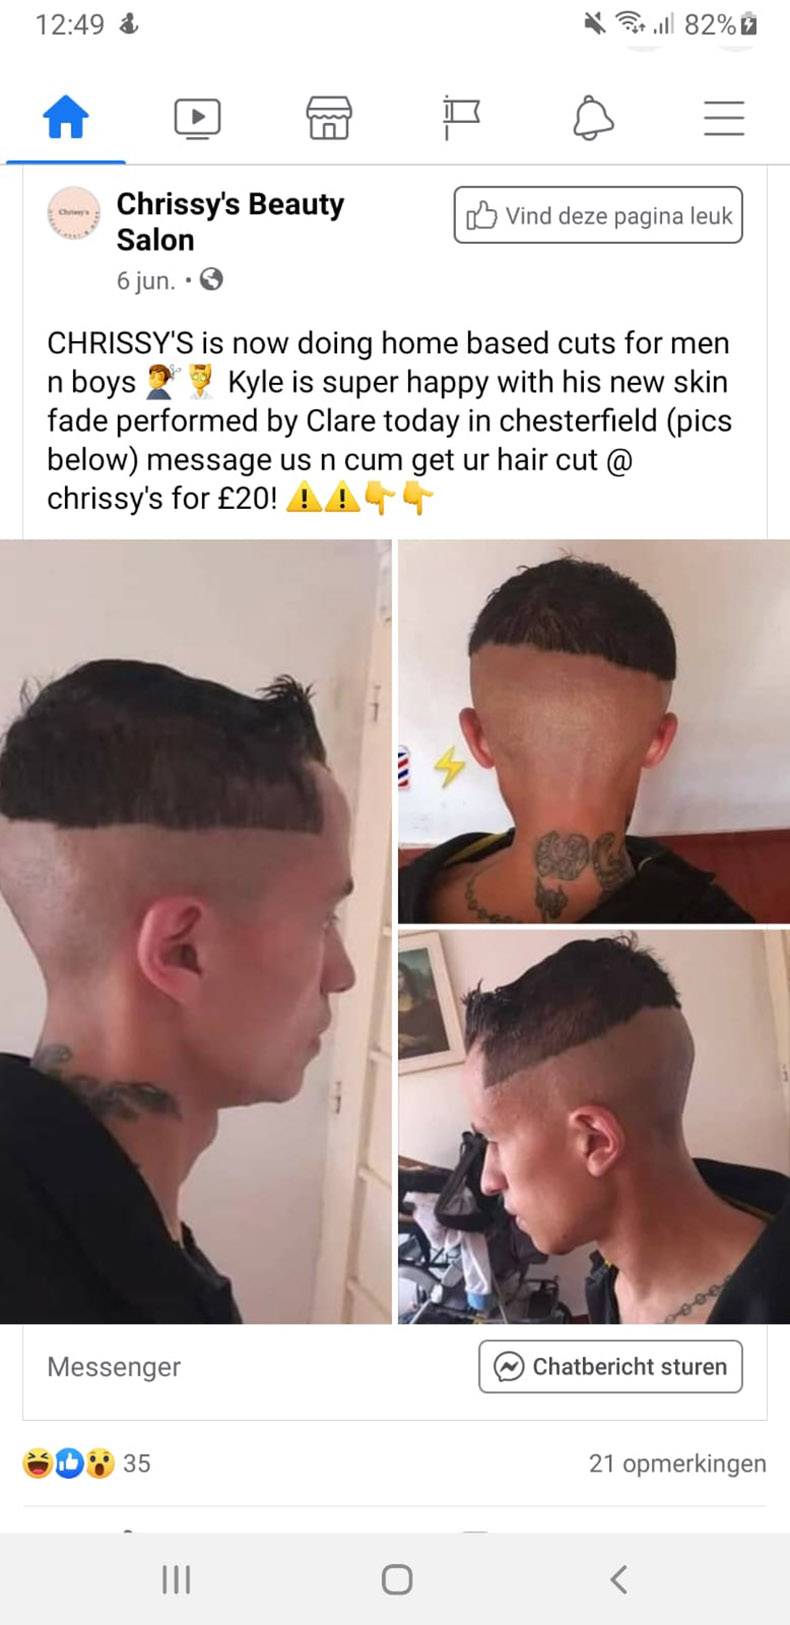 chrissy's beauty salon chesterfield - ut ill 82% 0 Vind deze pagina leuk Chrissy's Beauty Salon 6 jun.. Chrissy'S is now doing home based cuts for men n boys Kyle is super happy with his new skin fade performed by Clare today in chesterfield pics below me